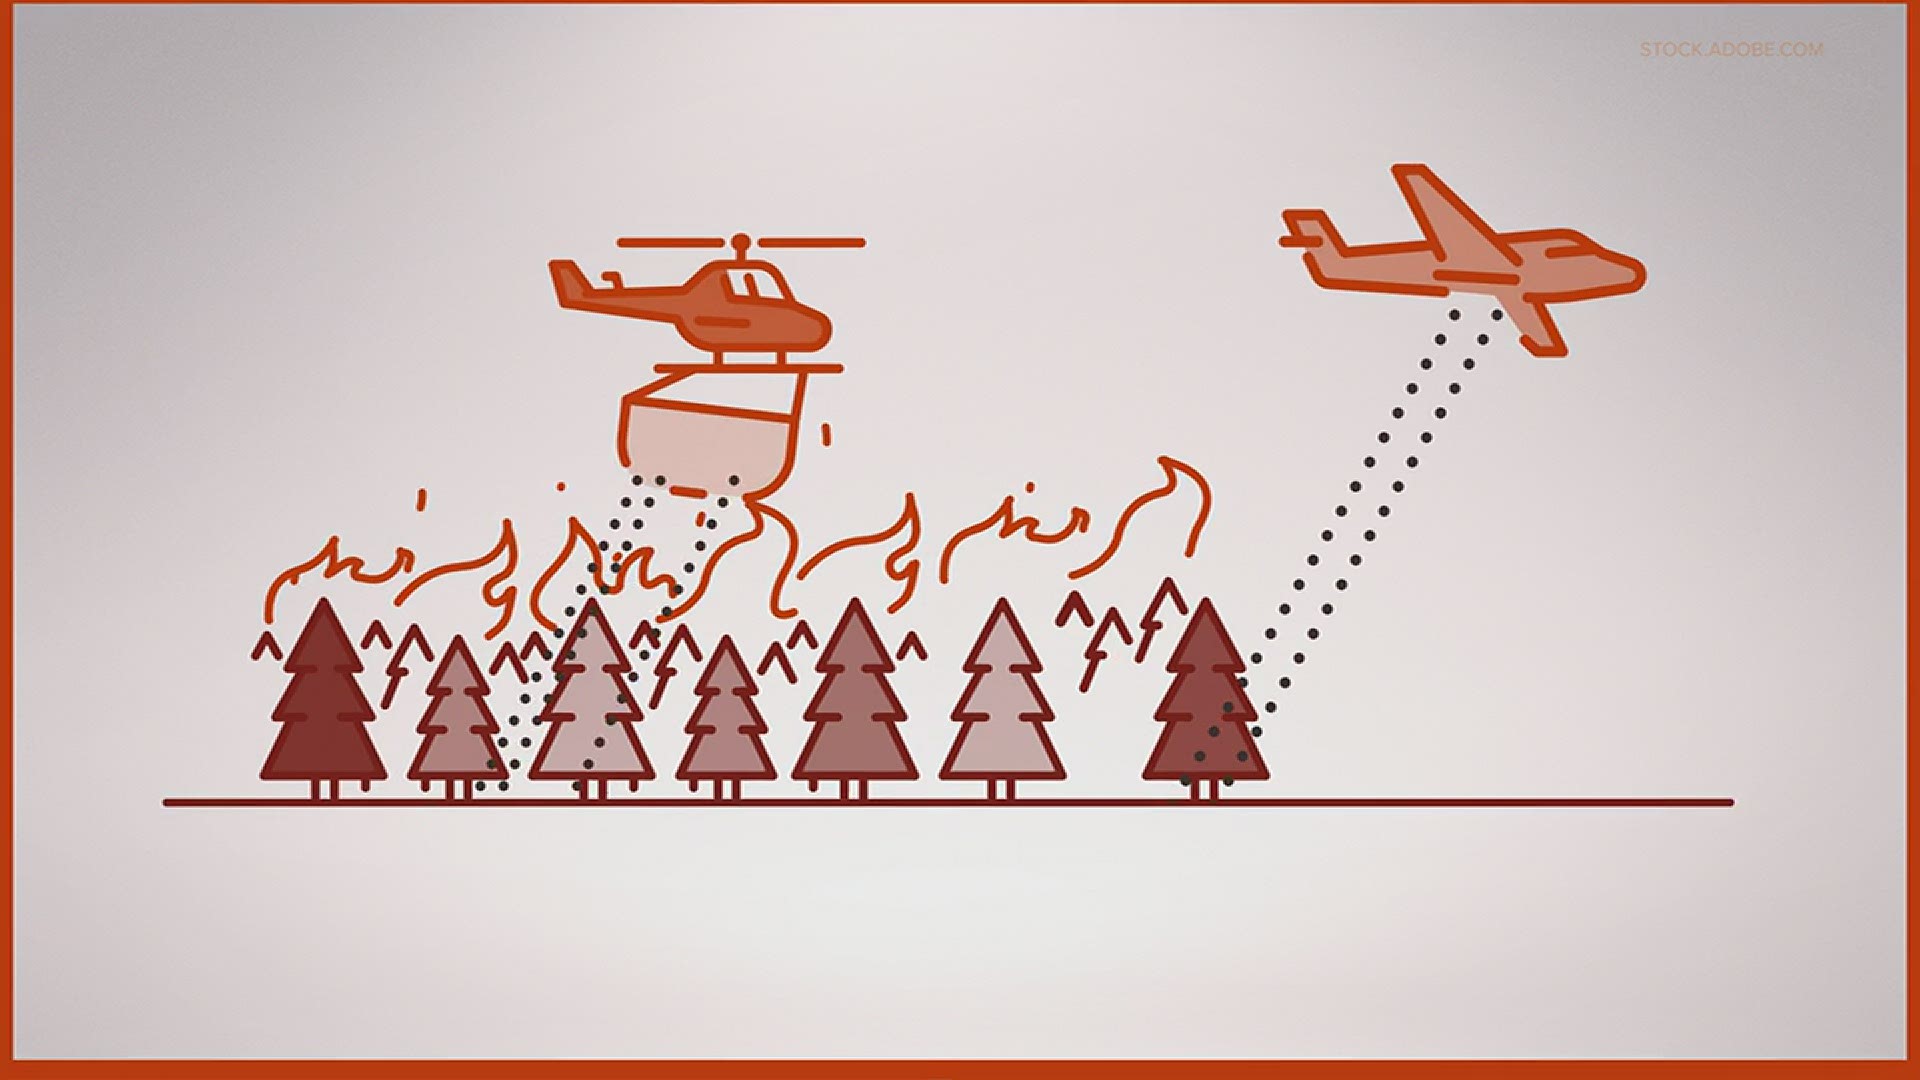 Planes and helicopters get a lot of attention in wildfires, but they mainly play a supporting role slowing fires down.